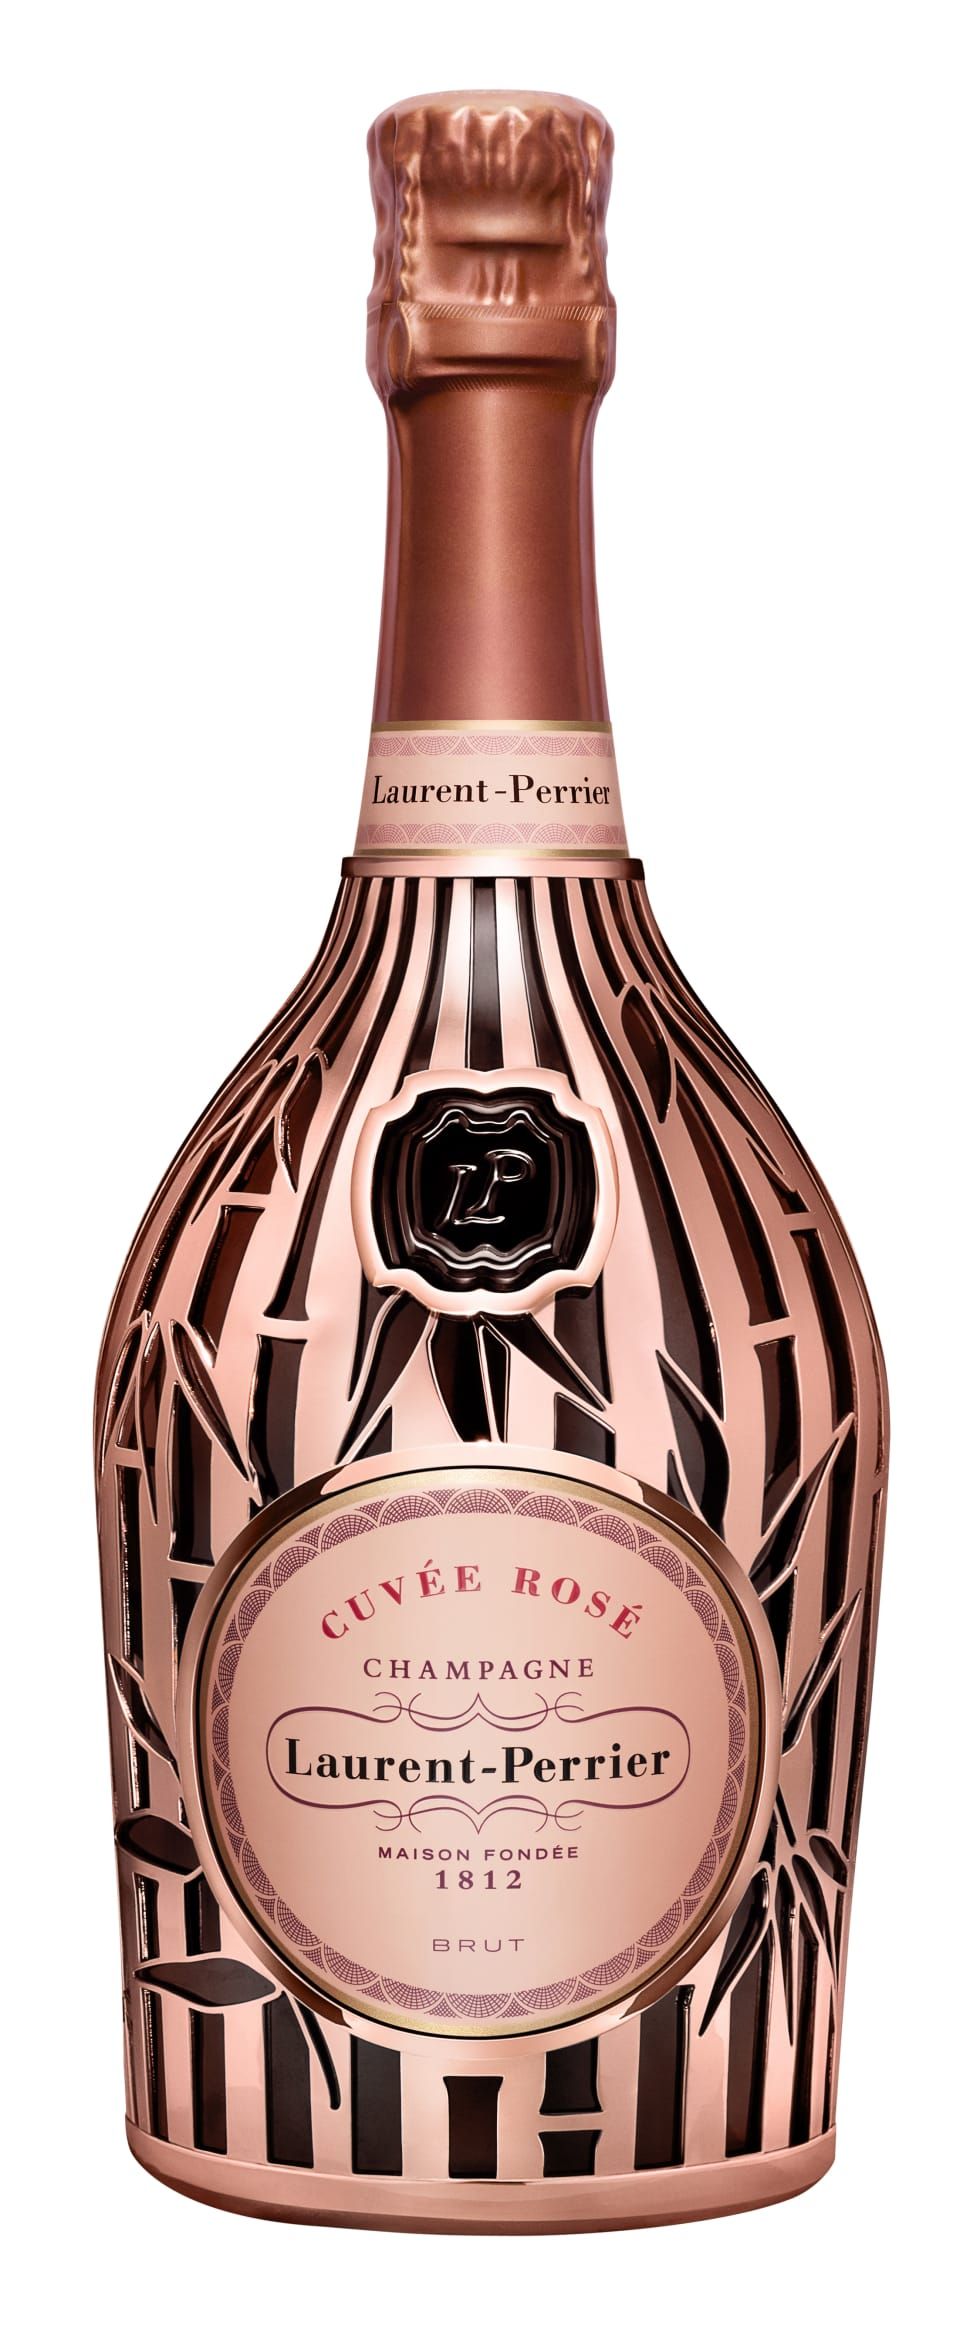 Laurent-Perrier Cuvee Rose (Limited Edition Bamboo Cage) | Wine.com | Wine.com